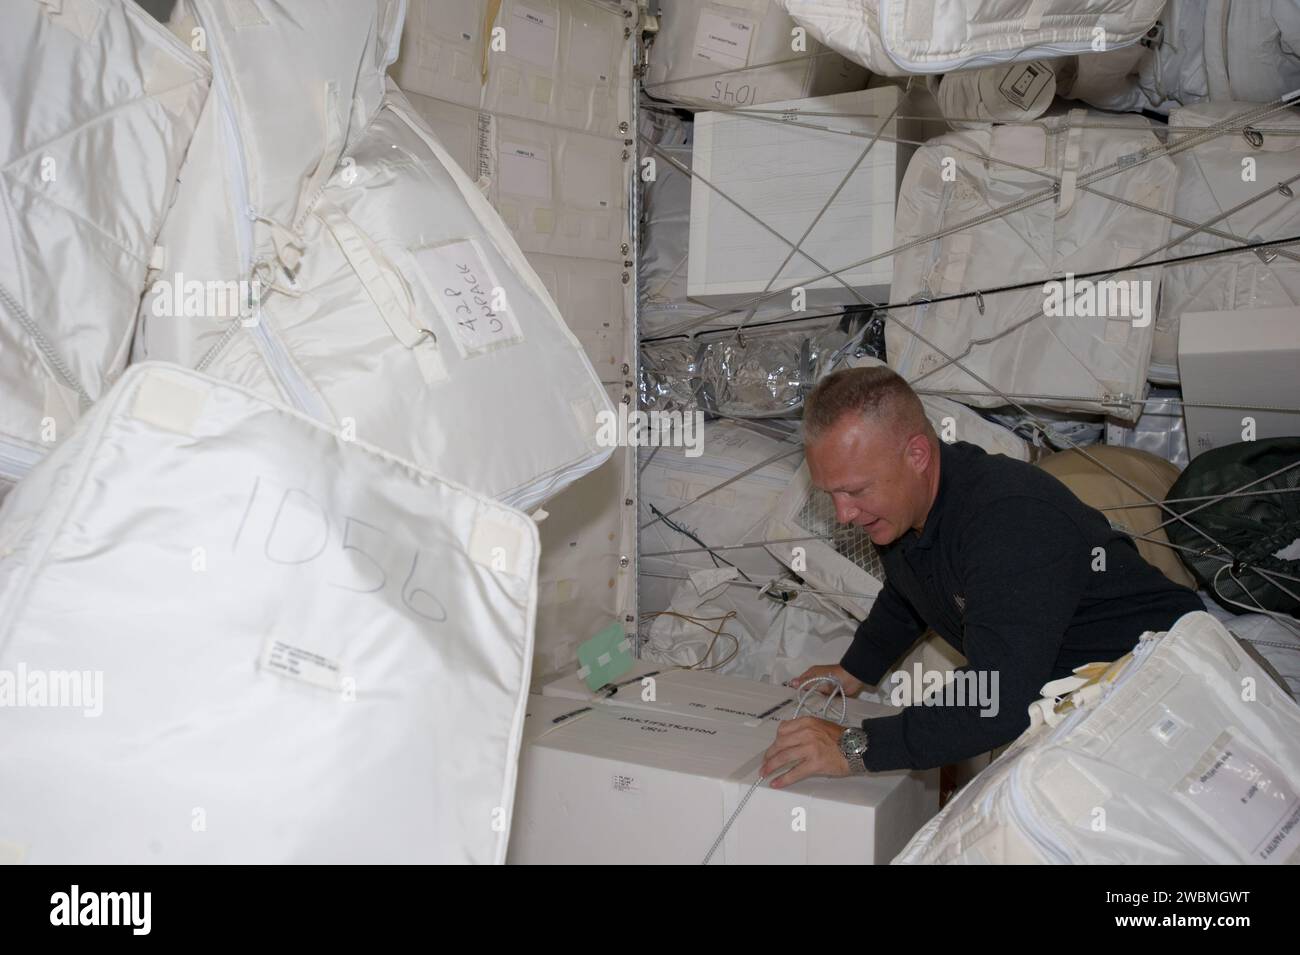 S135-E-007441 (11 July 2011) --- NASA astronaut Doug Hurley, STS-135 pilot, moves around supplies and equipment in the Leonardo Permanent Multipurpose Module (PMM) during the fourth day of flight for Atlantis' four person crew. This module is a component that joined the International Space Station complex after it was flown into space aboard the space shuttle Discovery on STS-133. Stock Photo